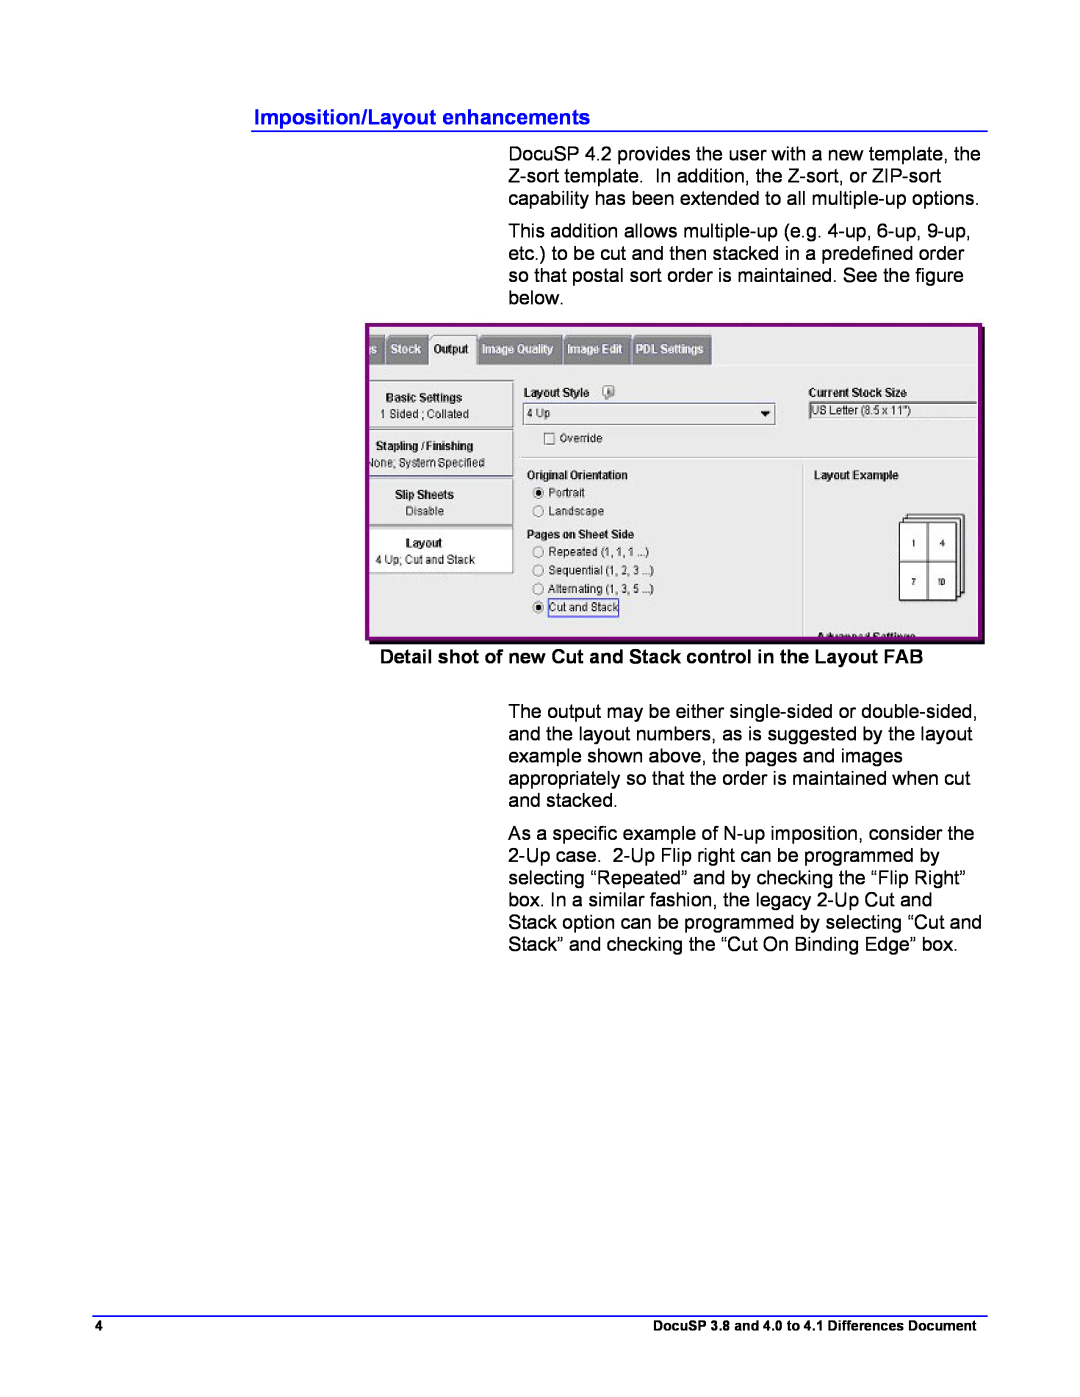 Xerox 4.2, 4.1 manual Imposition/Layout enhancements, Detail shot of new Cut and Stack control in the Layout FAB 